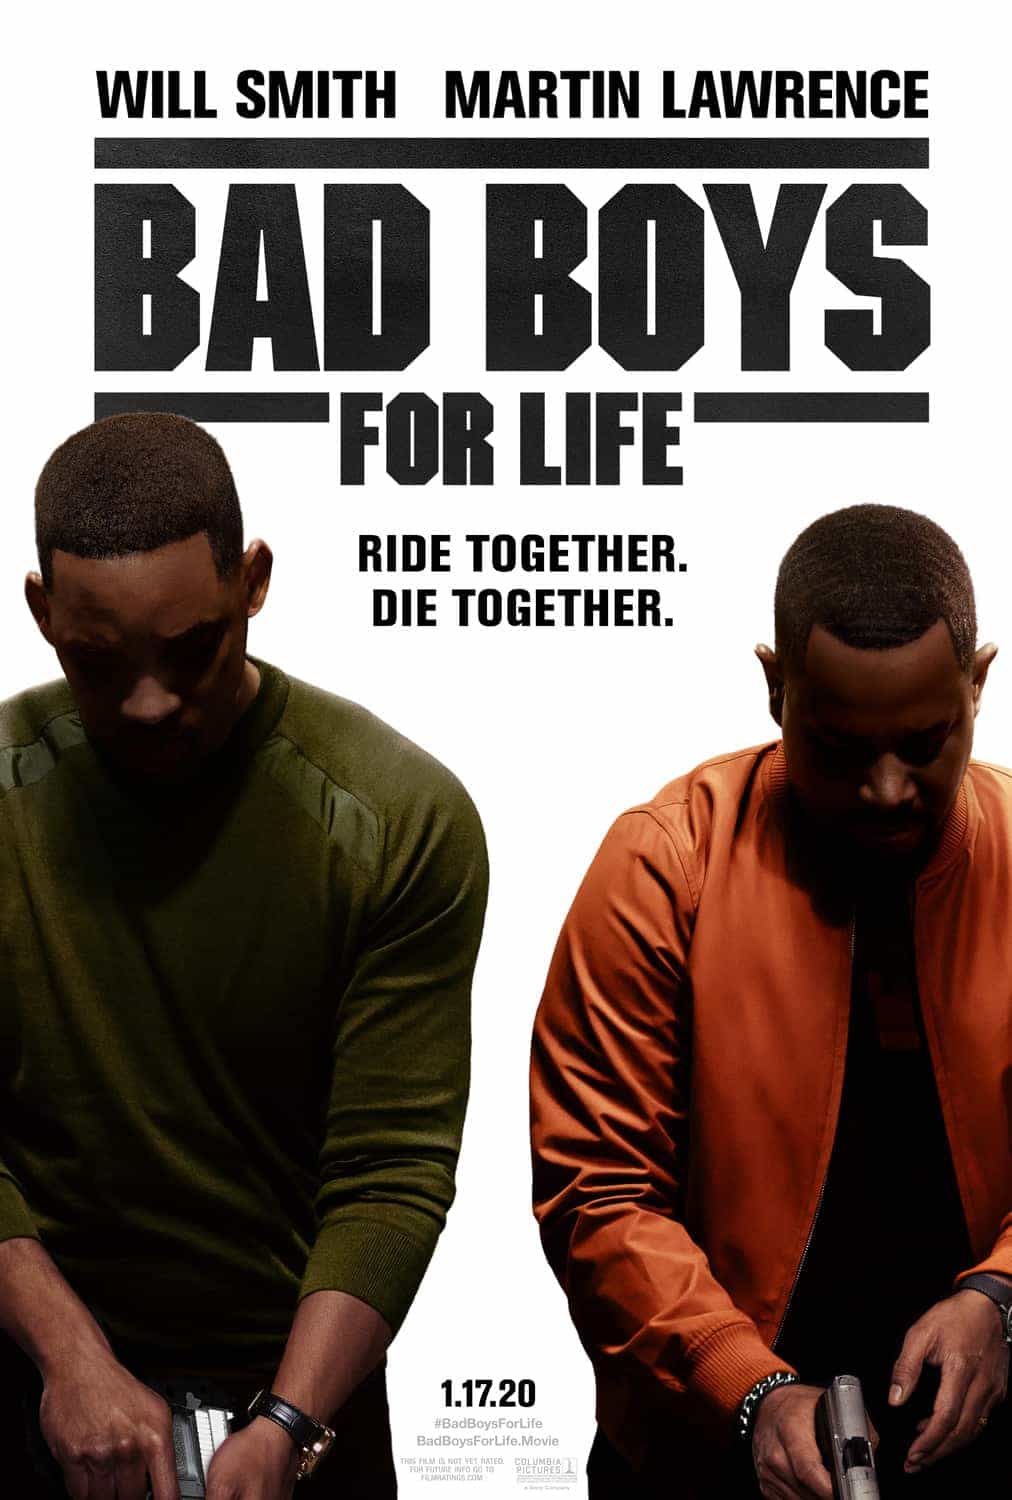 World Box Office Analysis 17th - 19th January 2020:  Smith and Lawrence Bad Boys sequel top the global box office on their return to our multiplex